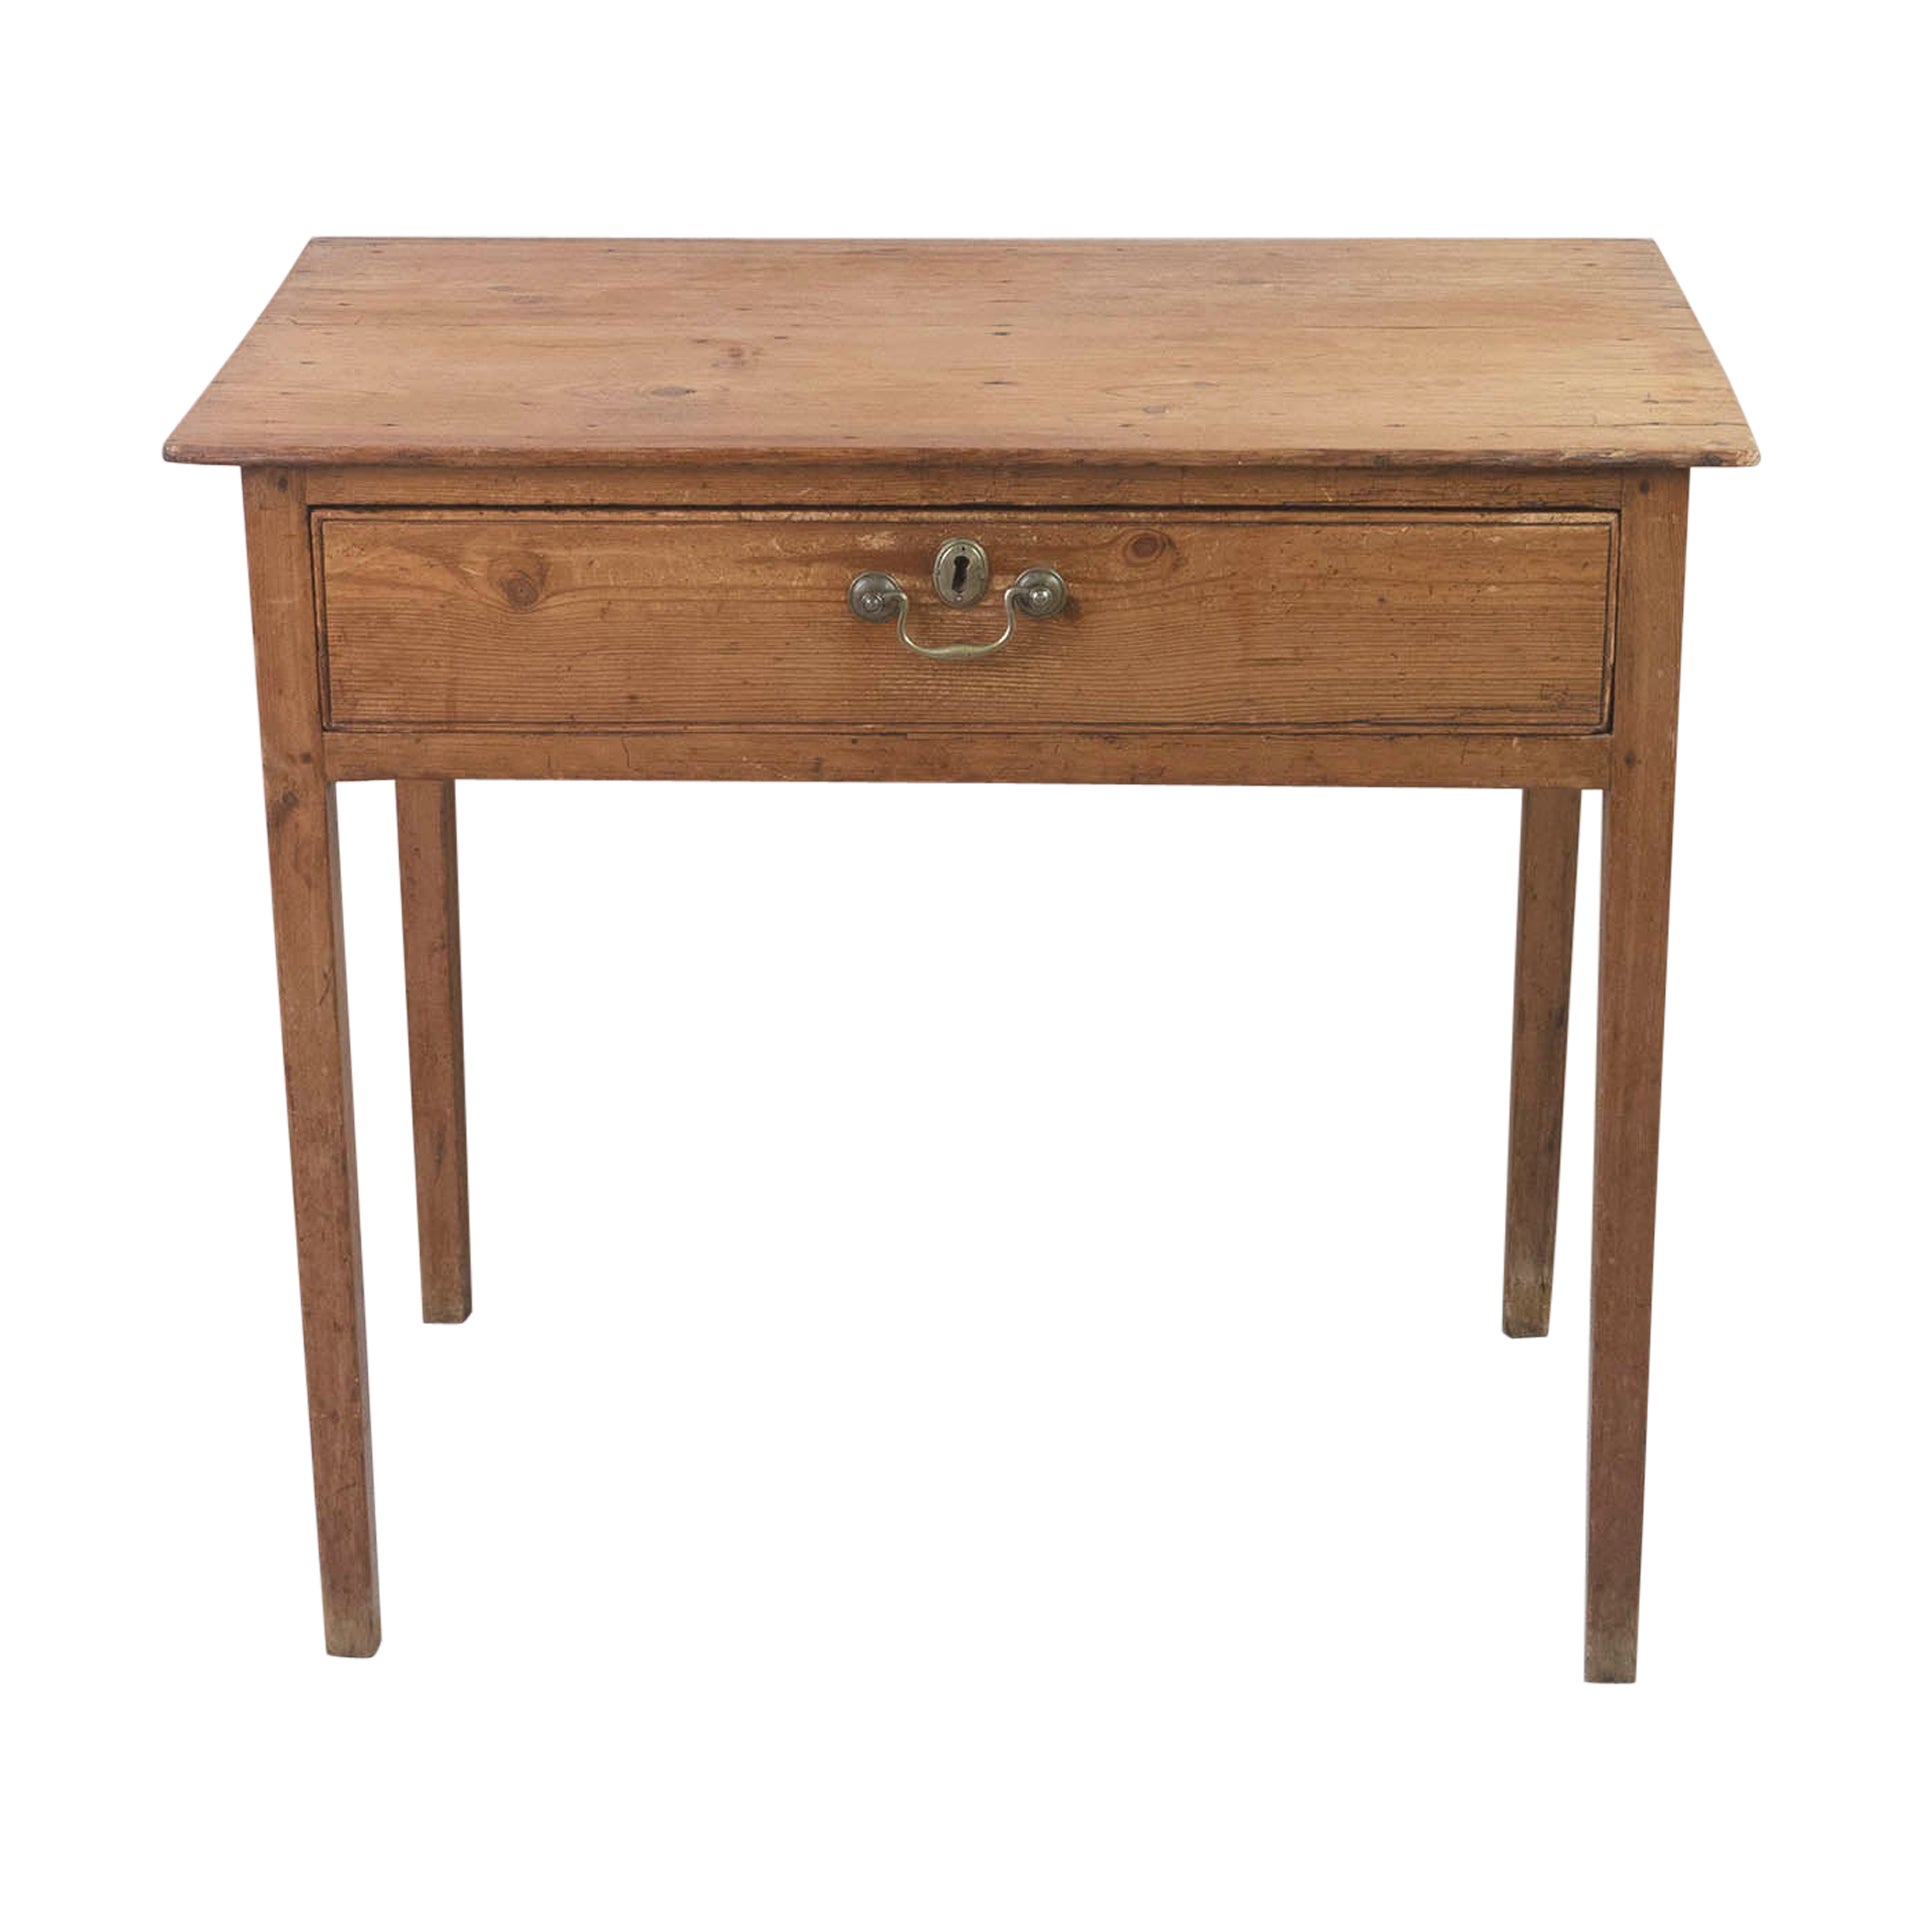 Small Antique Pine Side Table With Drawer. English, C.1780